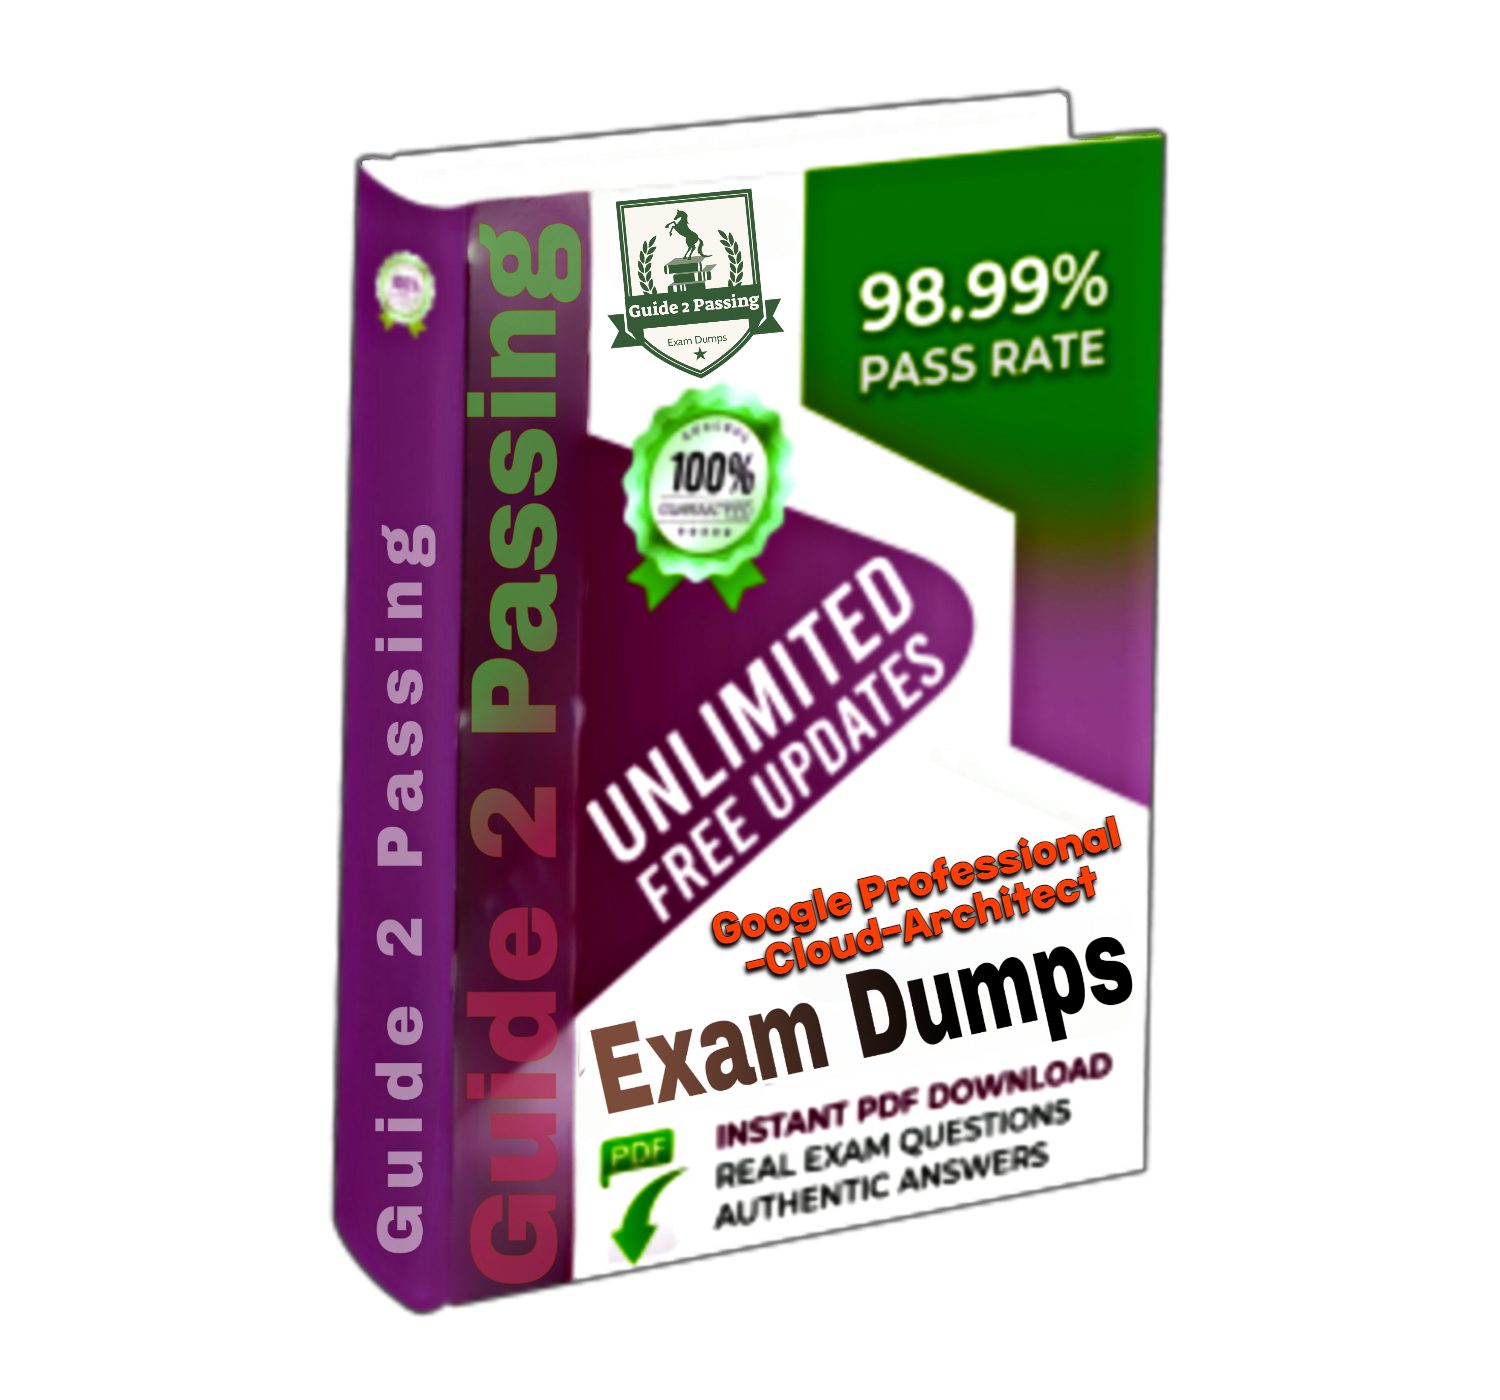 Pass Your Google Professional-Cloud-Architect Exam Dumps From Guide 2 Passing